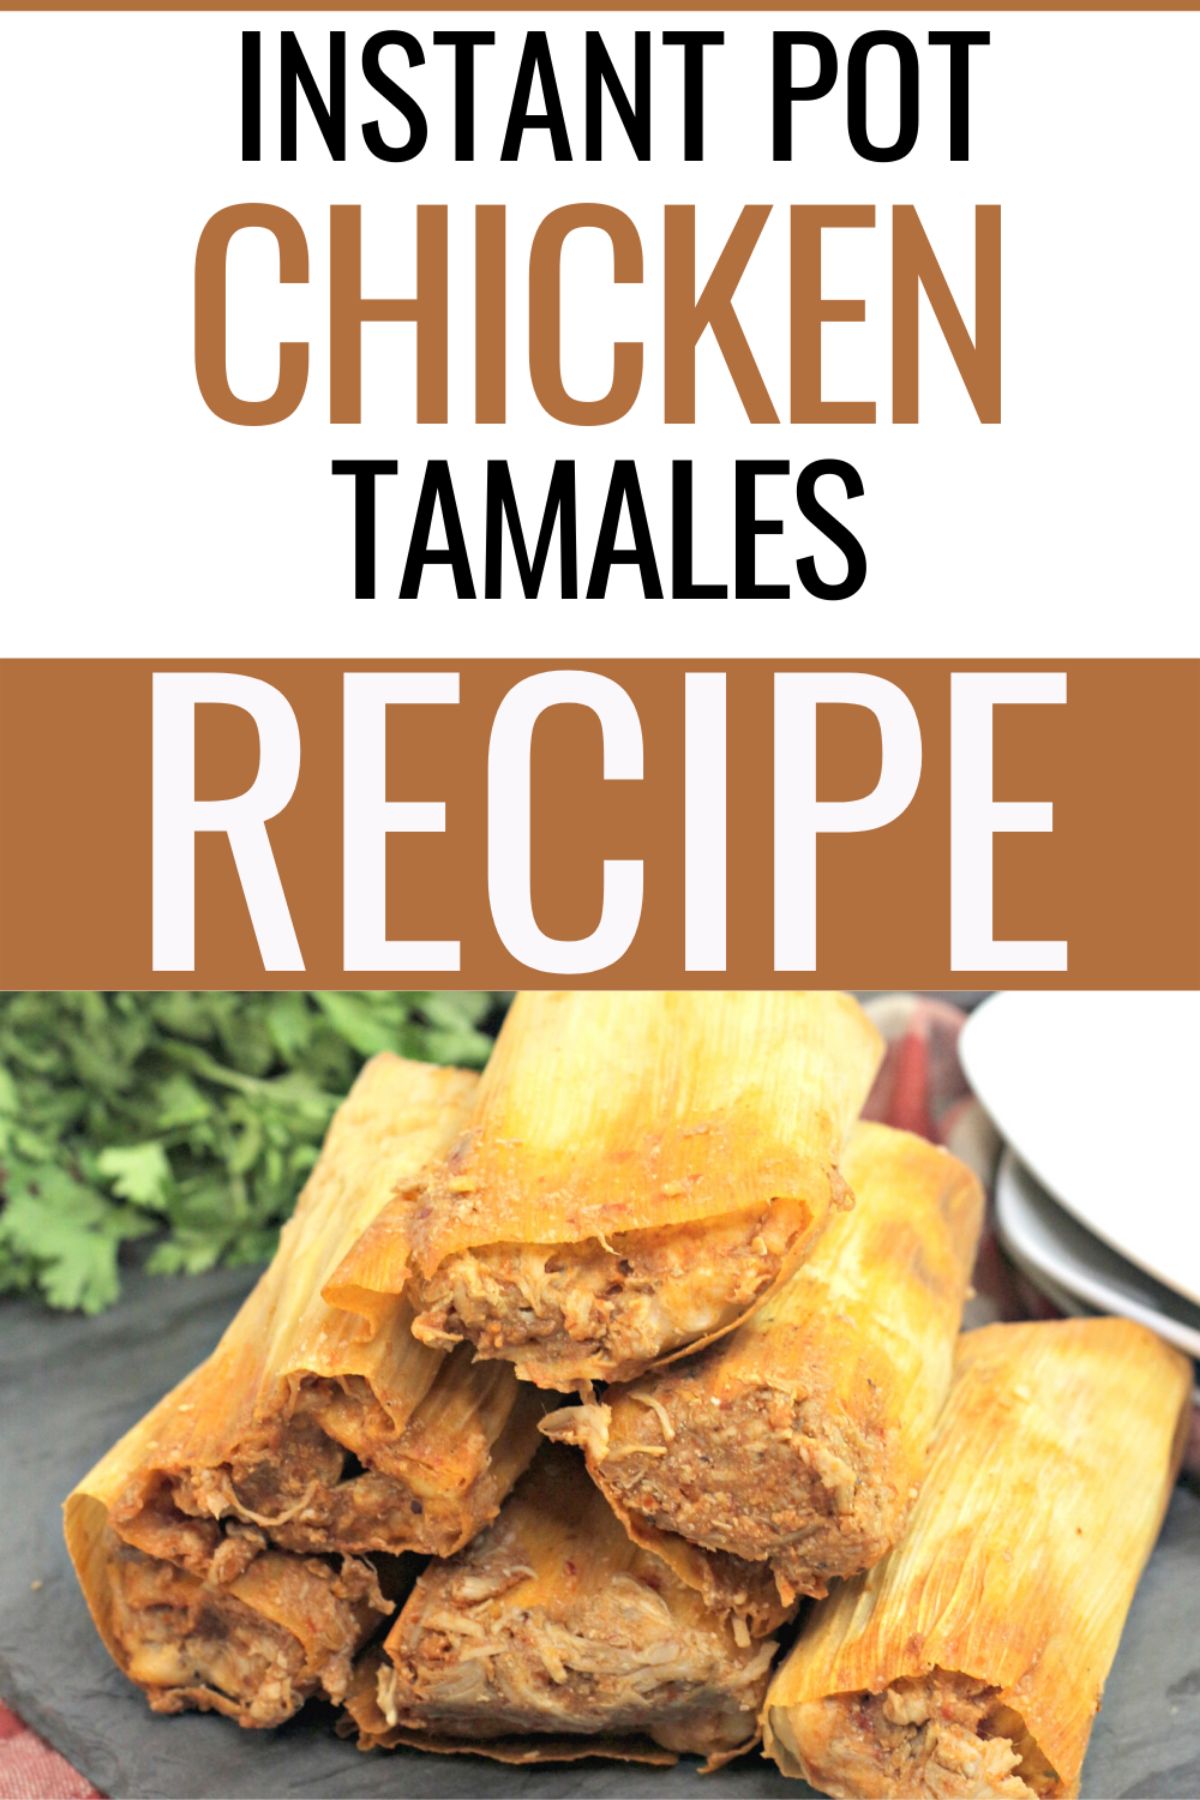 6 Instant Pot Tamales stacked like a pyramid at the bottom of the image and a text at the upper part of the image reading "Instant Pot Chicken Tamales Recipe"